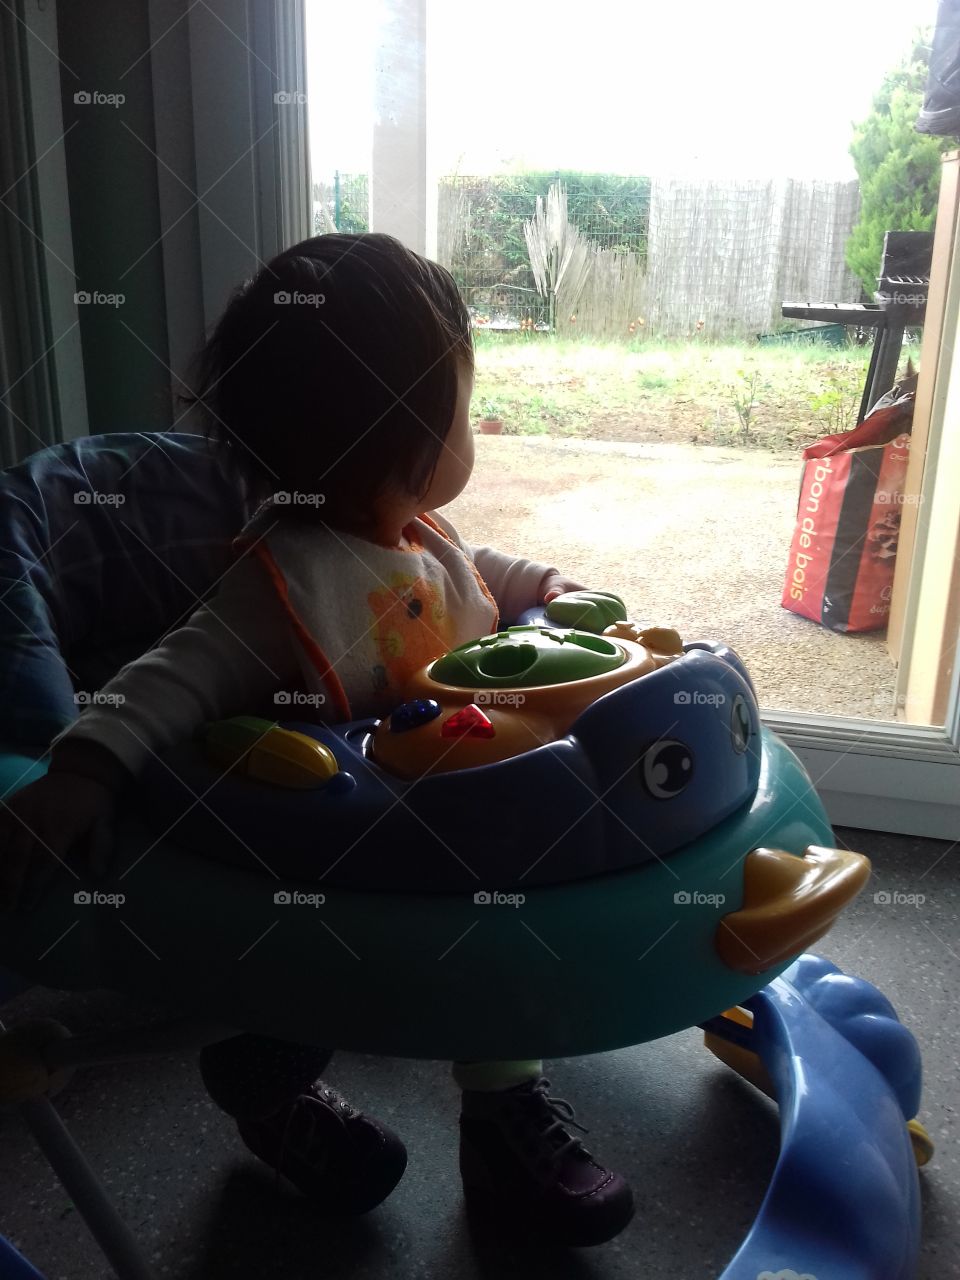 riding her walker while watching outside